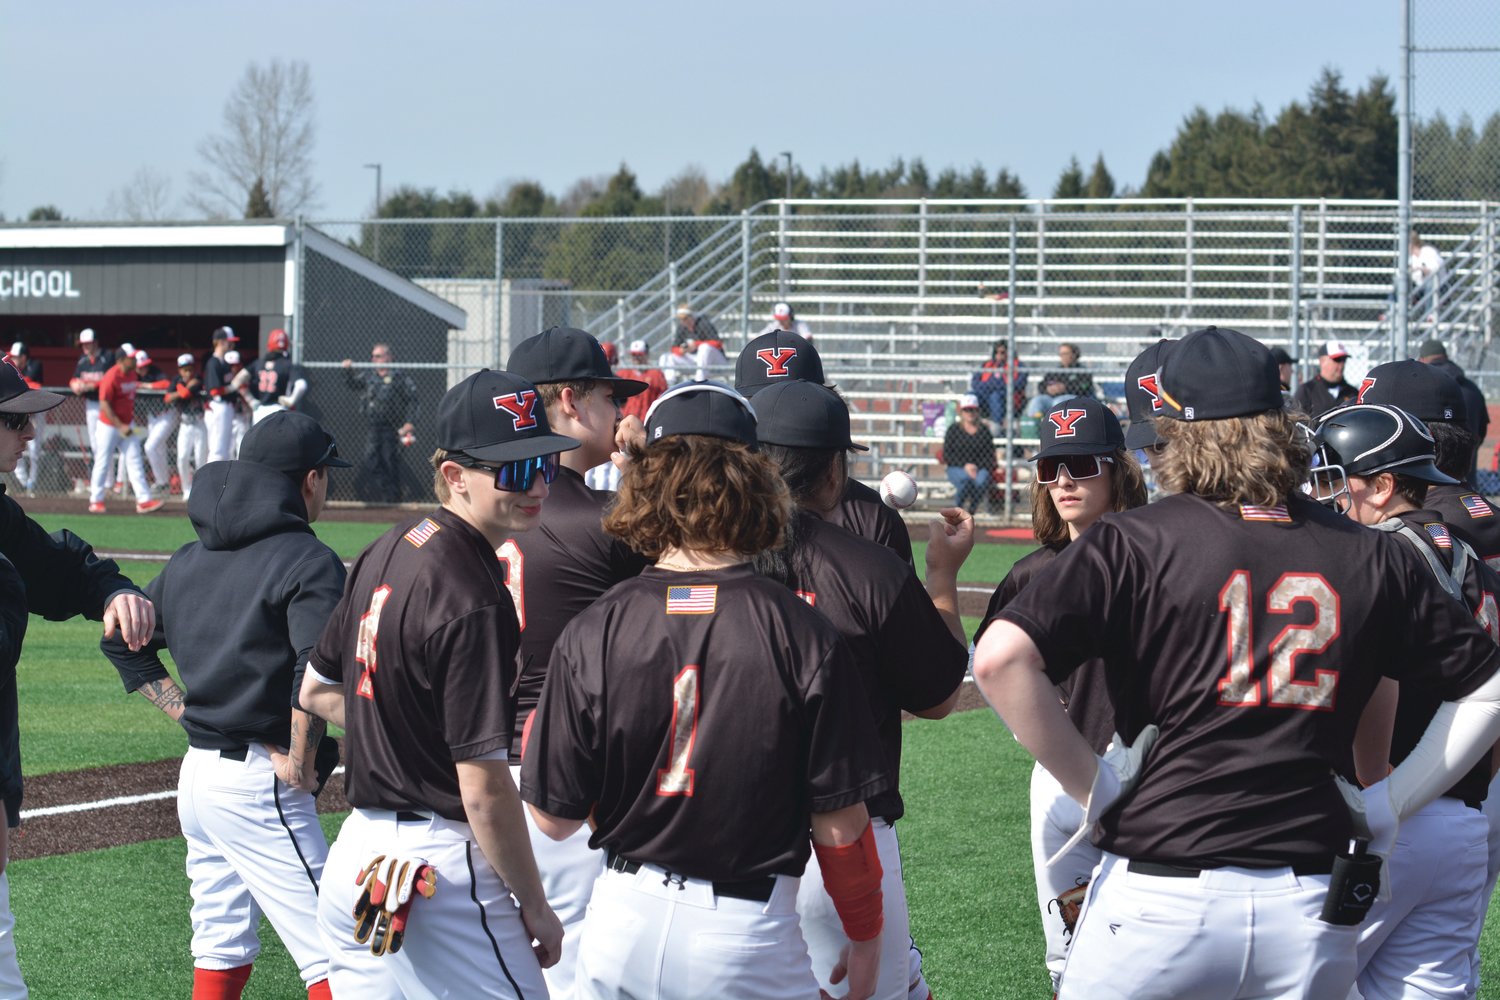 Members of the Tornados baseball team converse prior to the start of their game against Steilacoom on Friday, March 17.